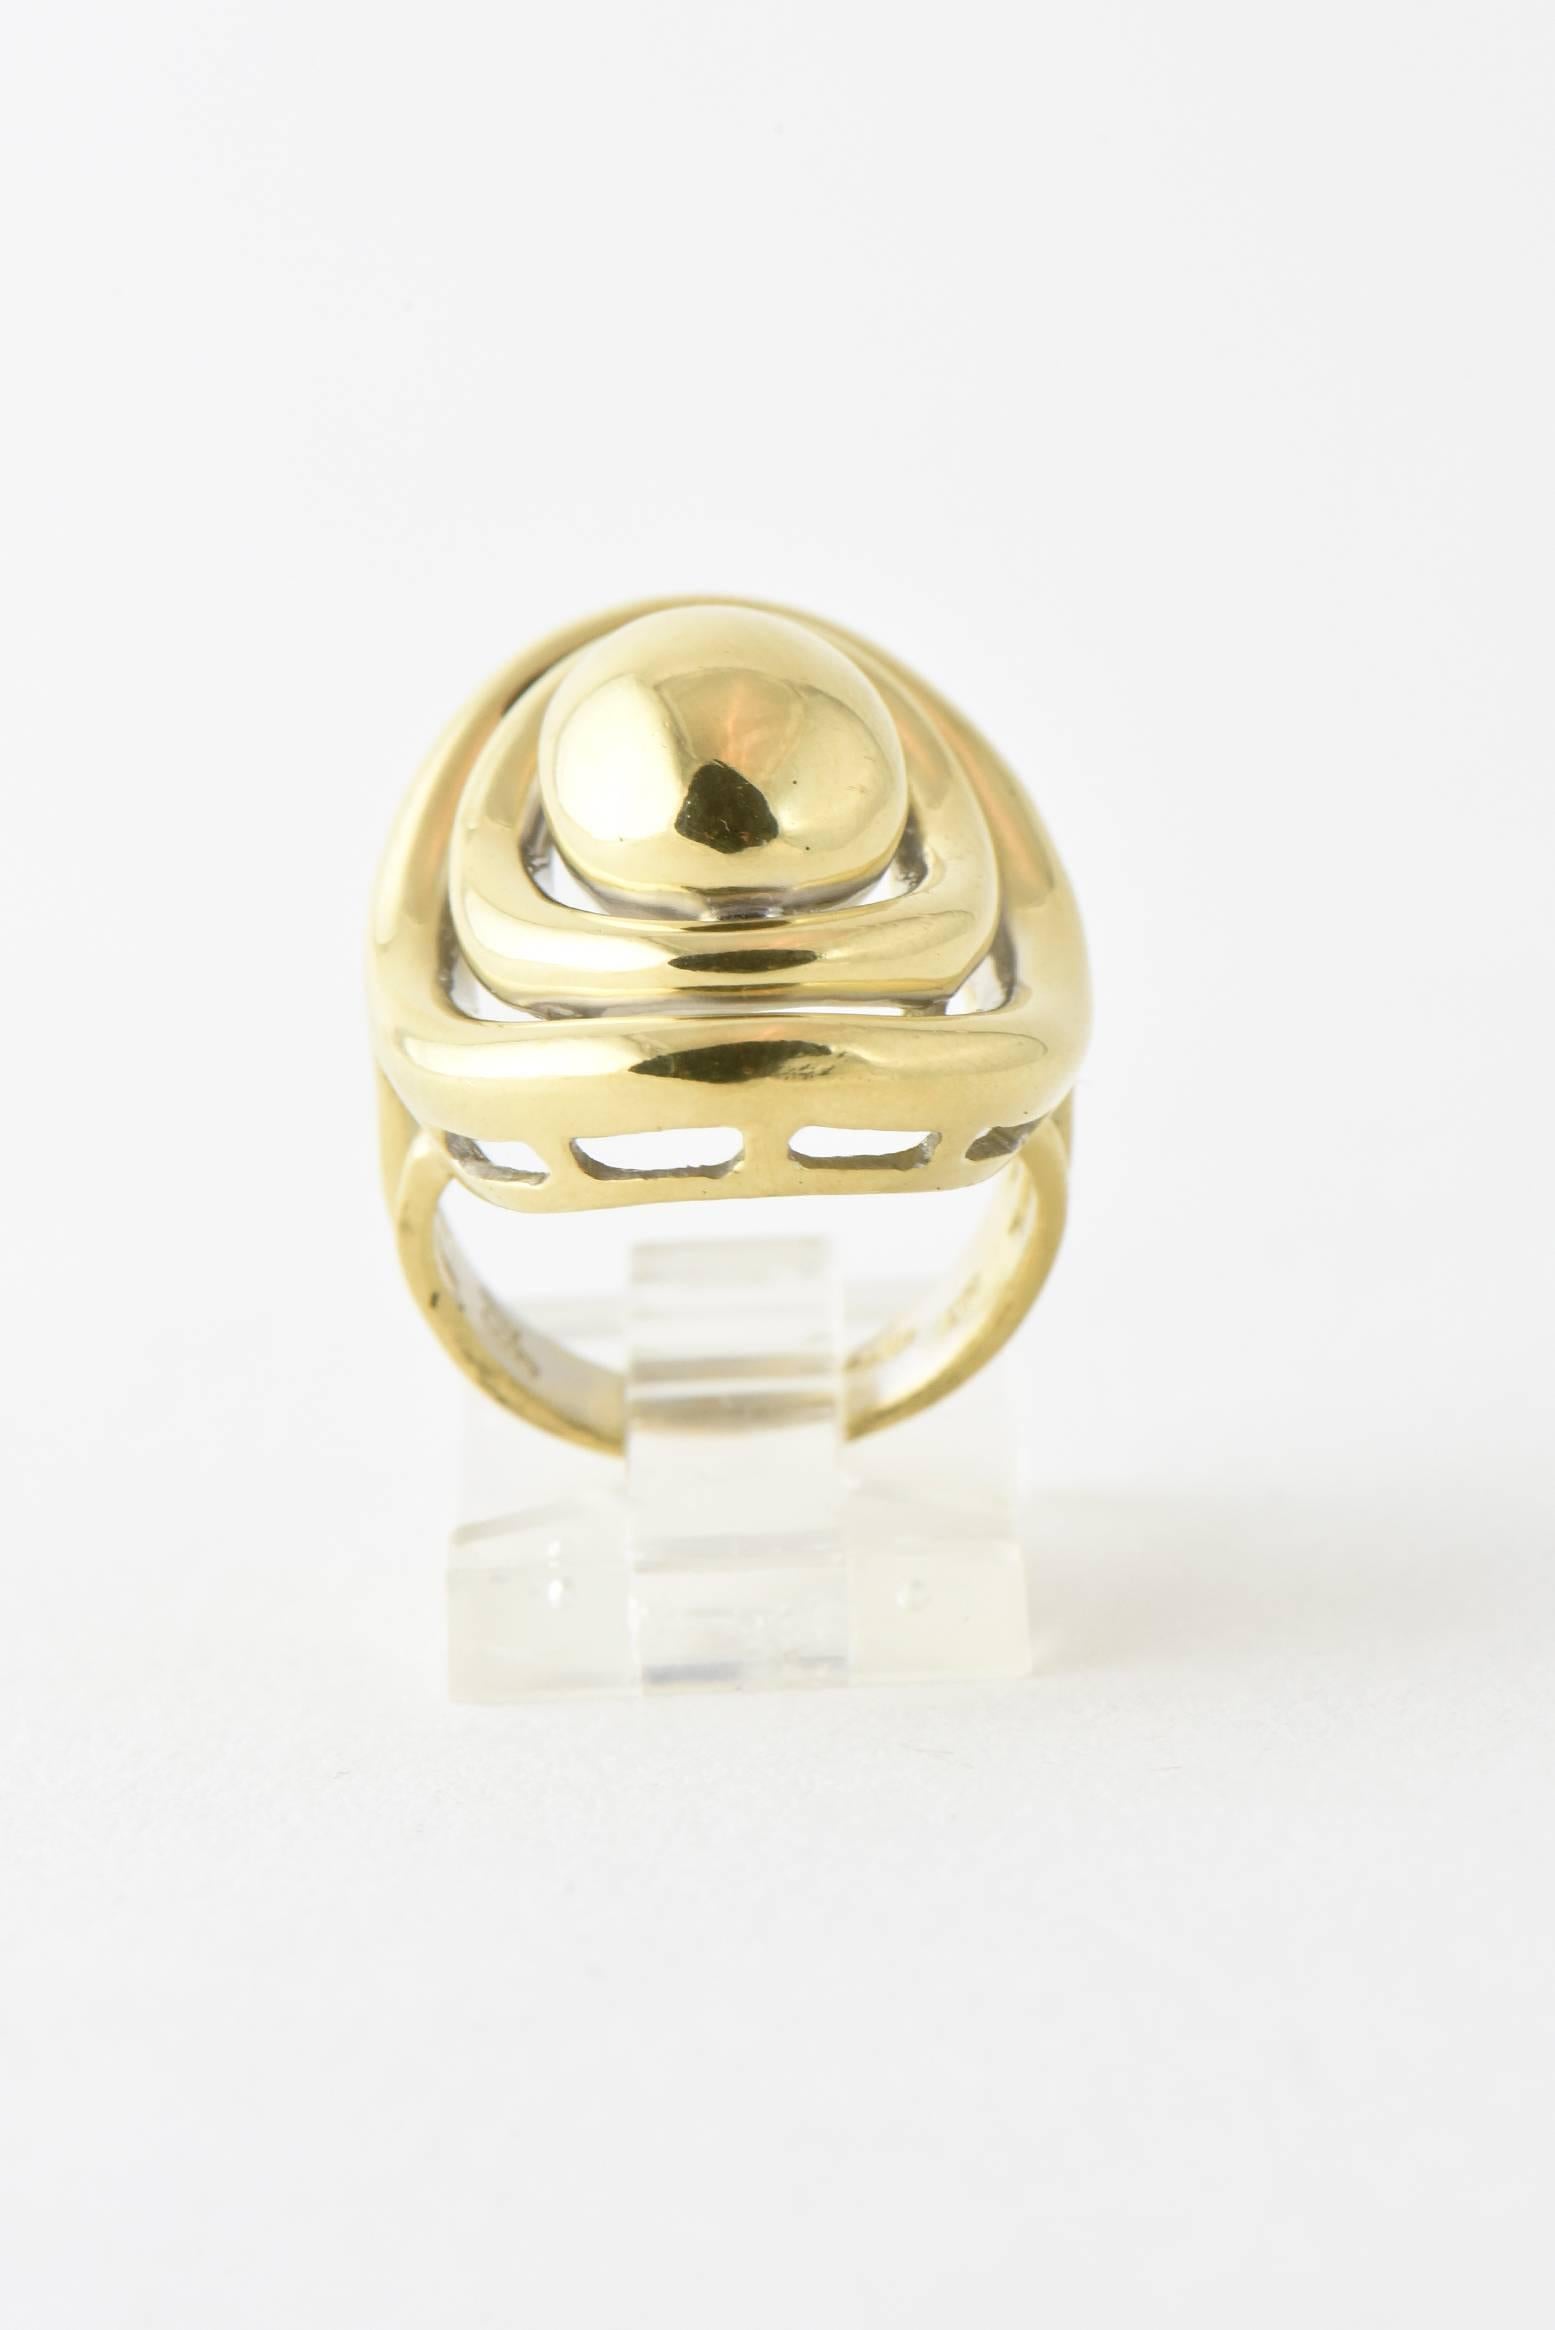 Long Three Dimensional Oval Dome Gold Cocktail Ring by Molina 2